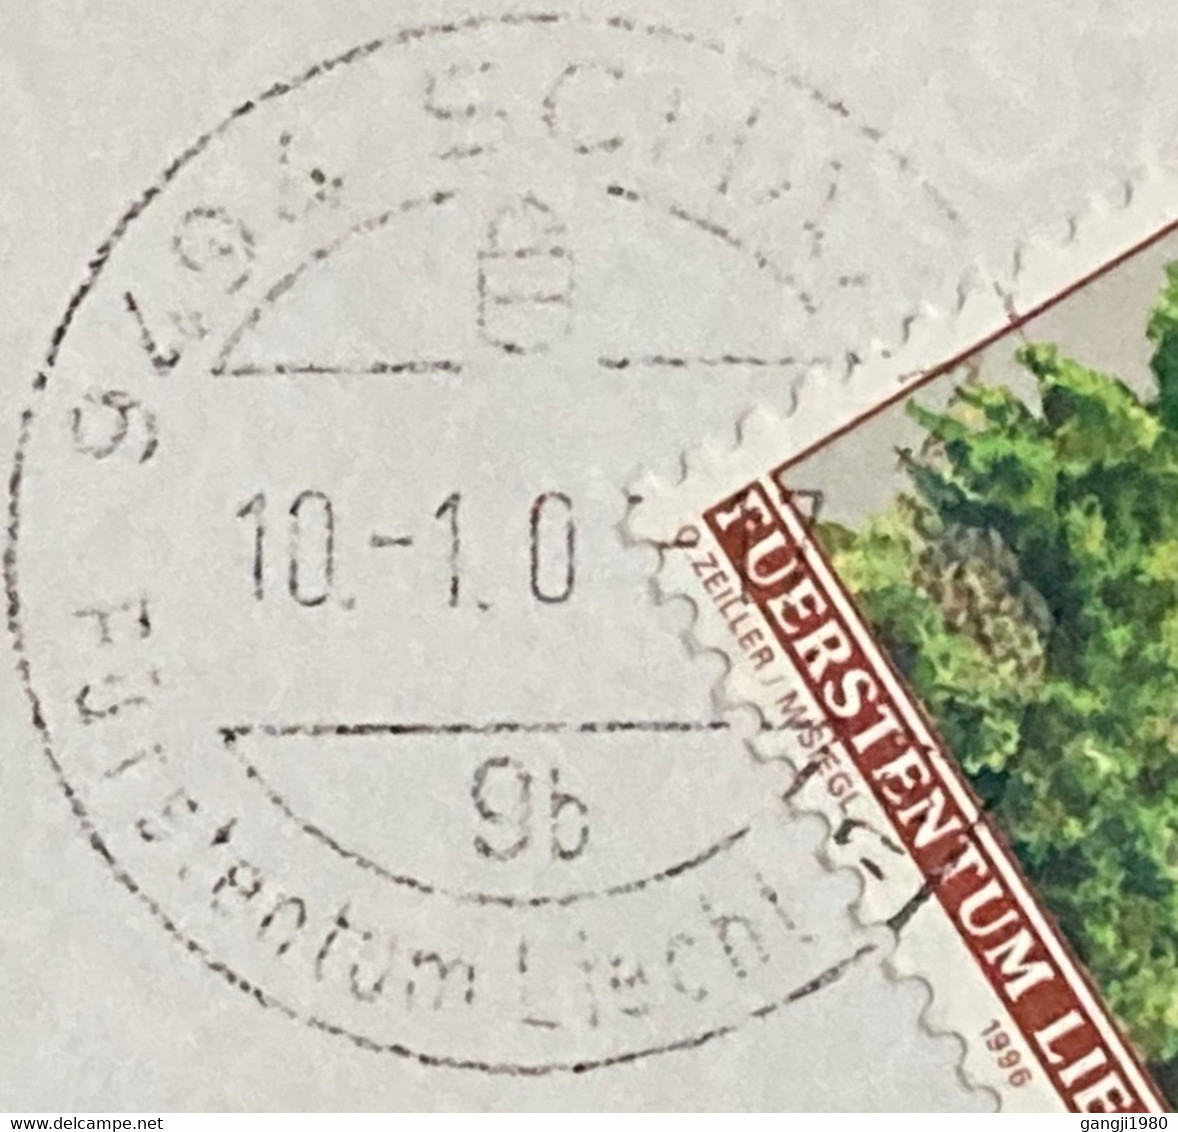 LIECHTENSTEIN 2006, 3 STAMPS USED IN SWITZERLAND REGISTERED!!! INTERESTING SCHAAN CITY CANCELLATION!!! COVER TO ENGLAND - Covers & Documents